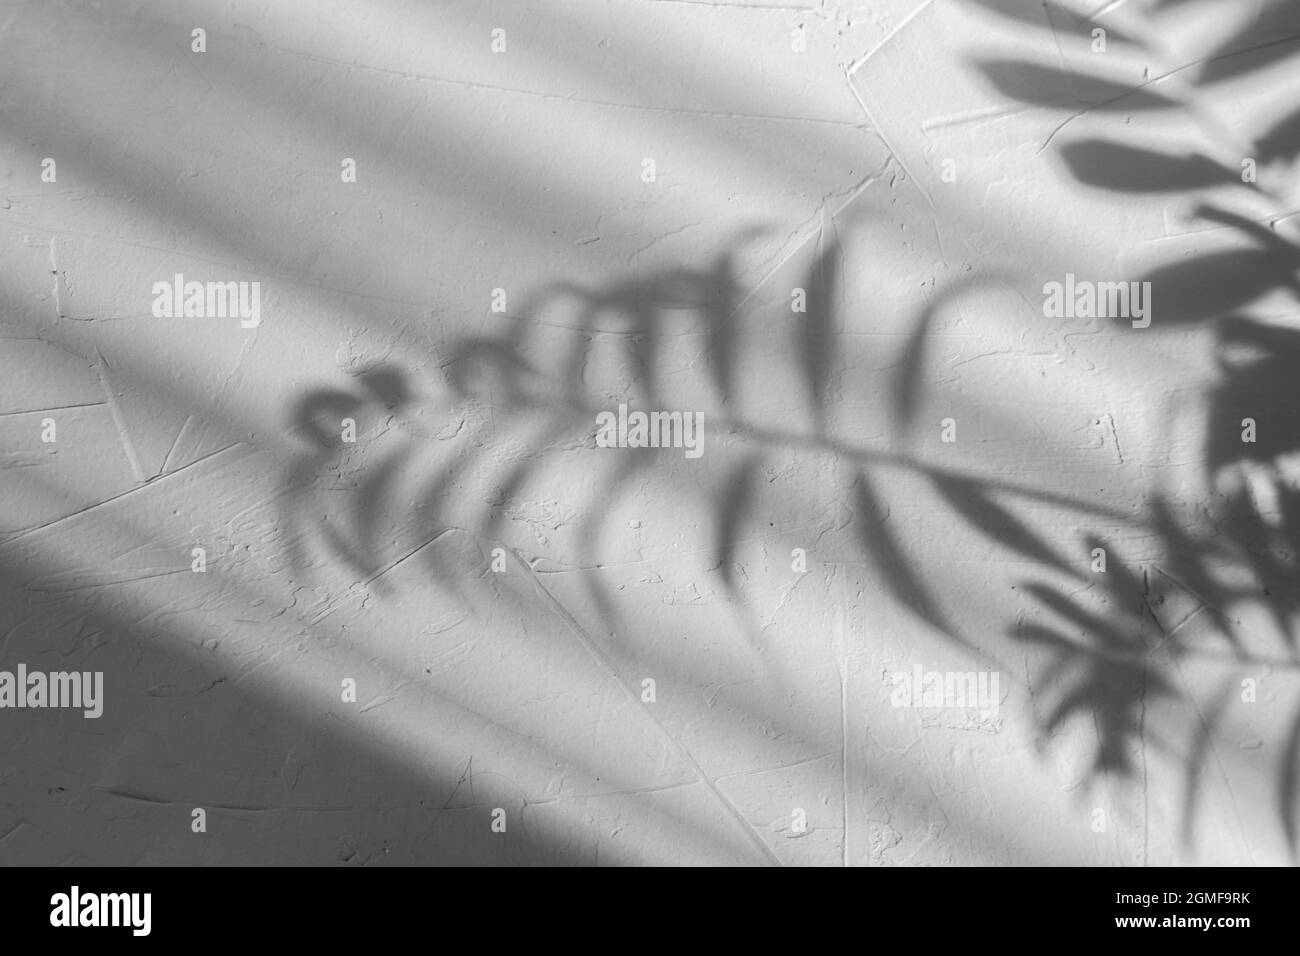 abstracted palm leaf shadow on grey concrete background Stock Photo